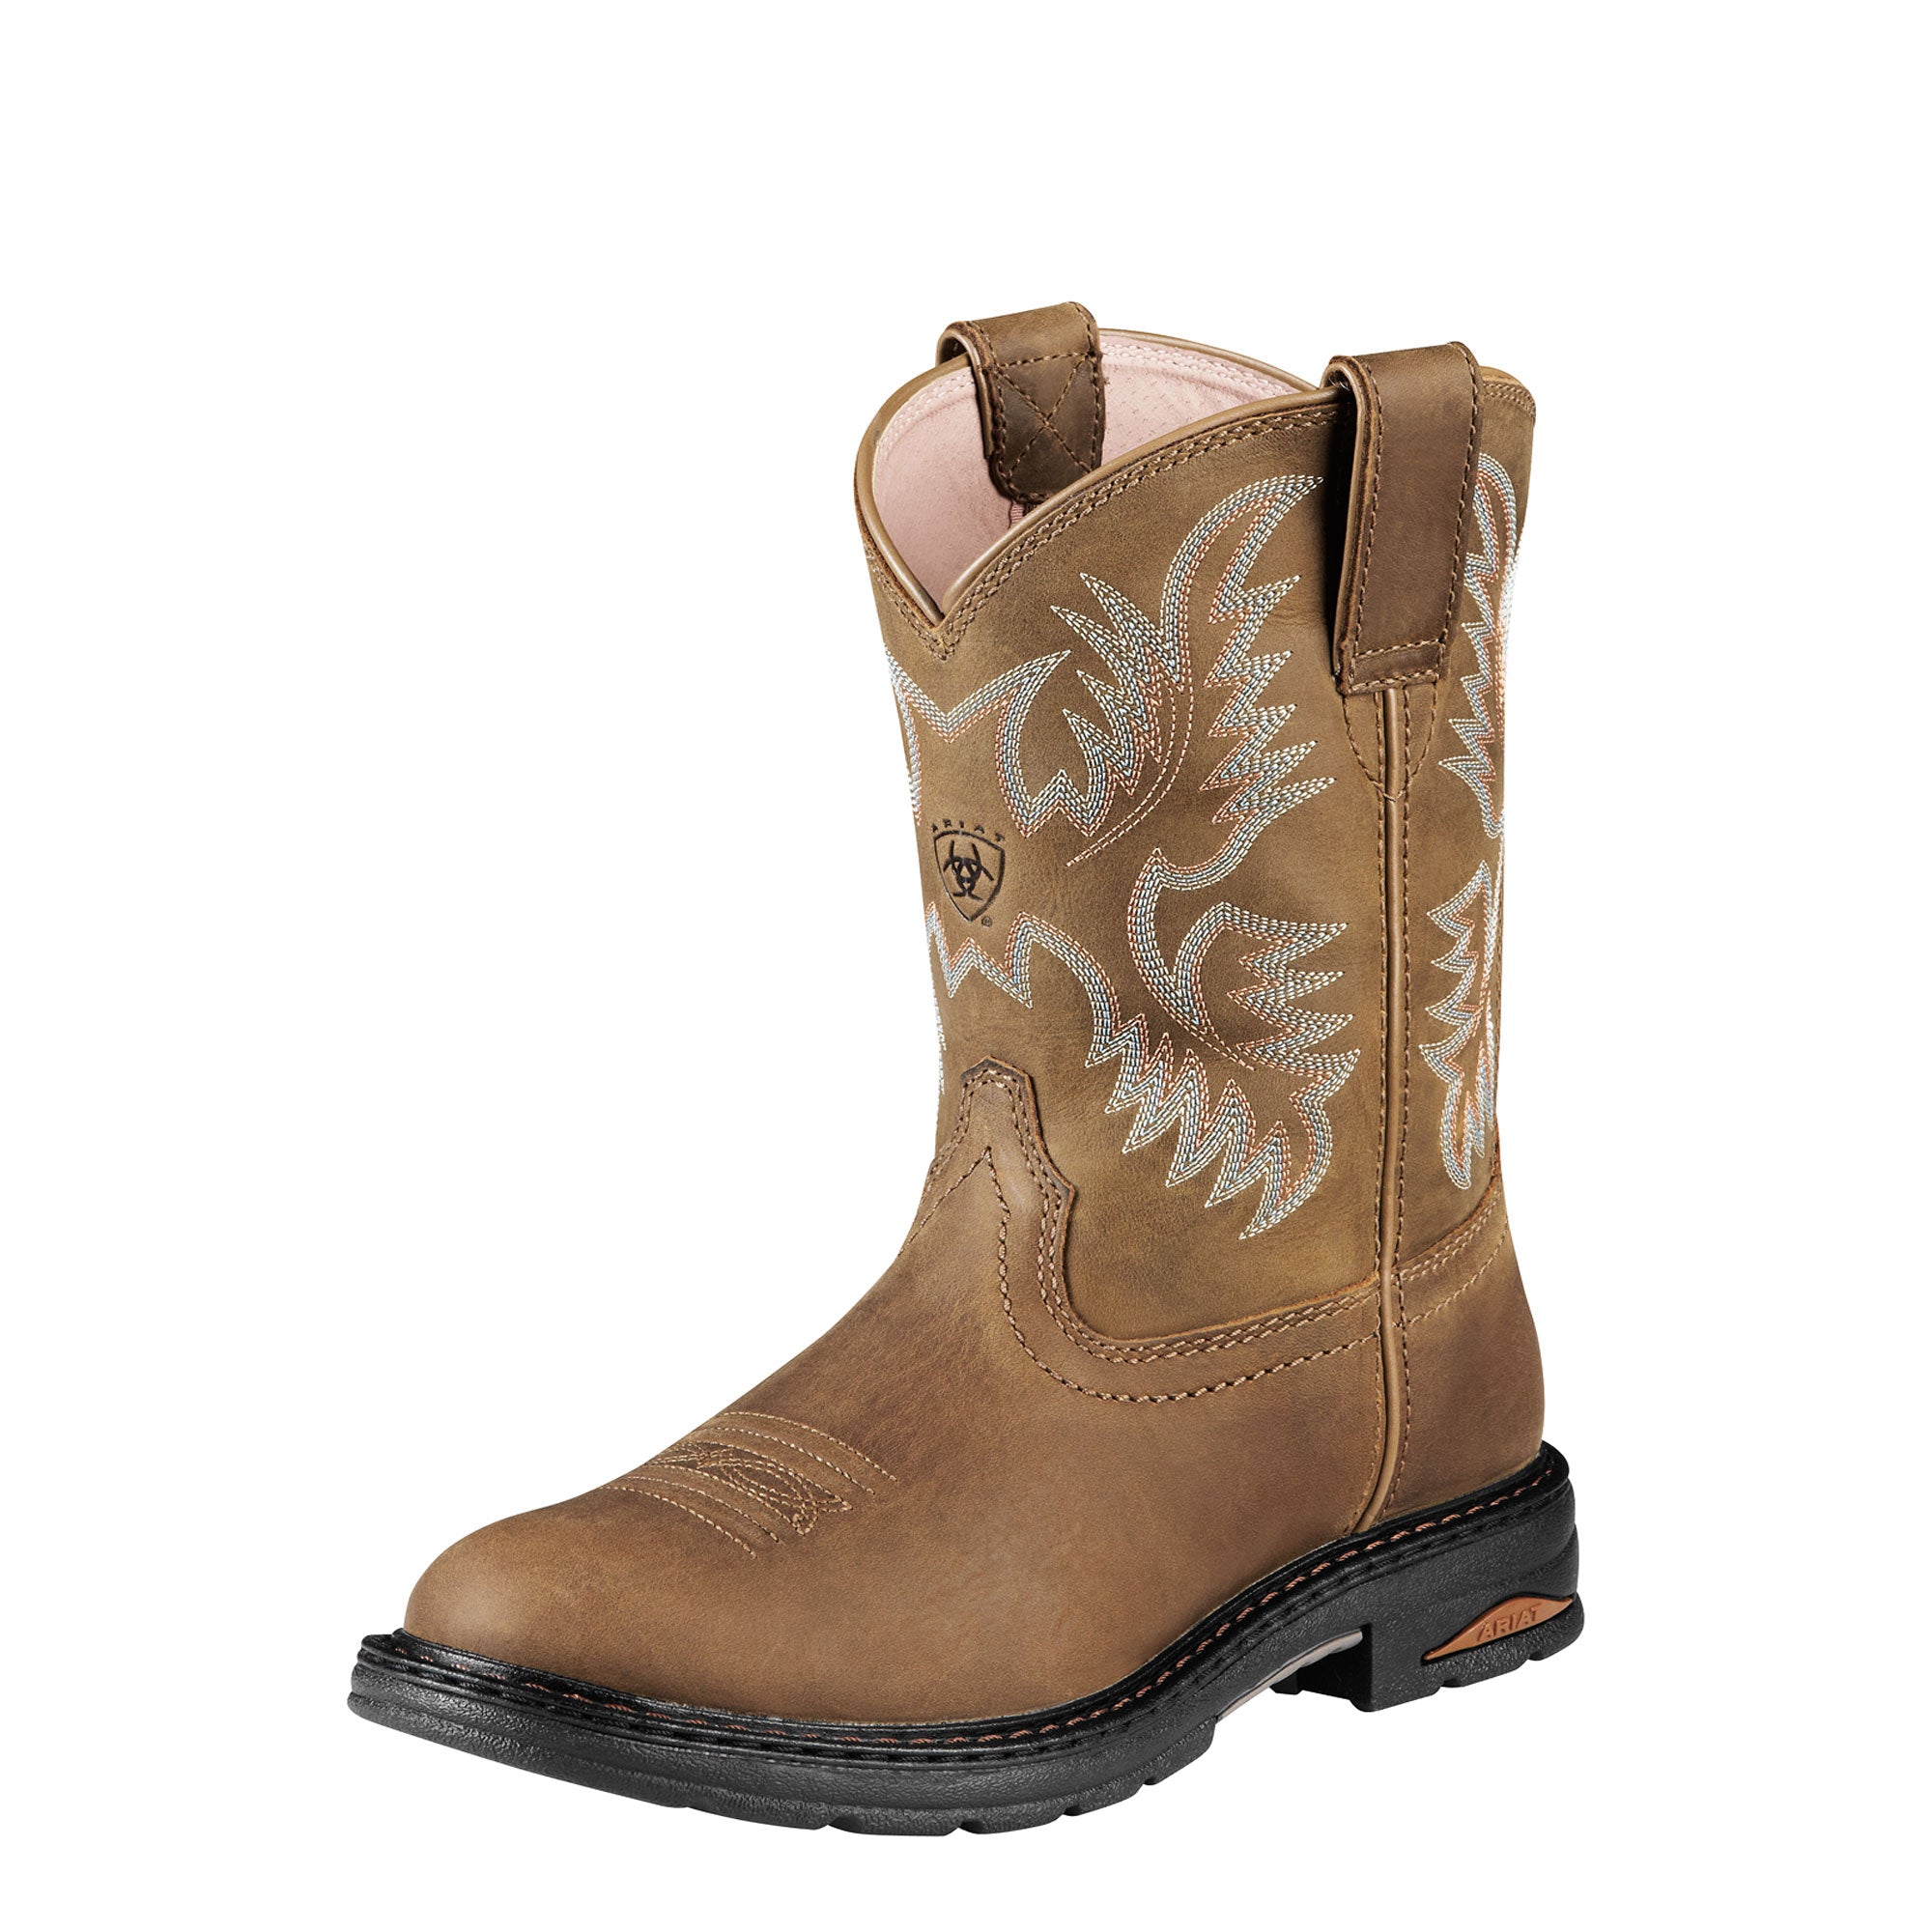 Ariat Women's Tracey Composite Toe Work Boot